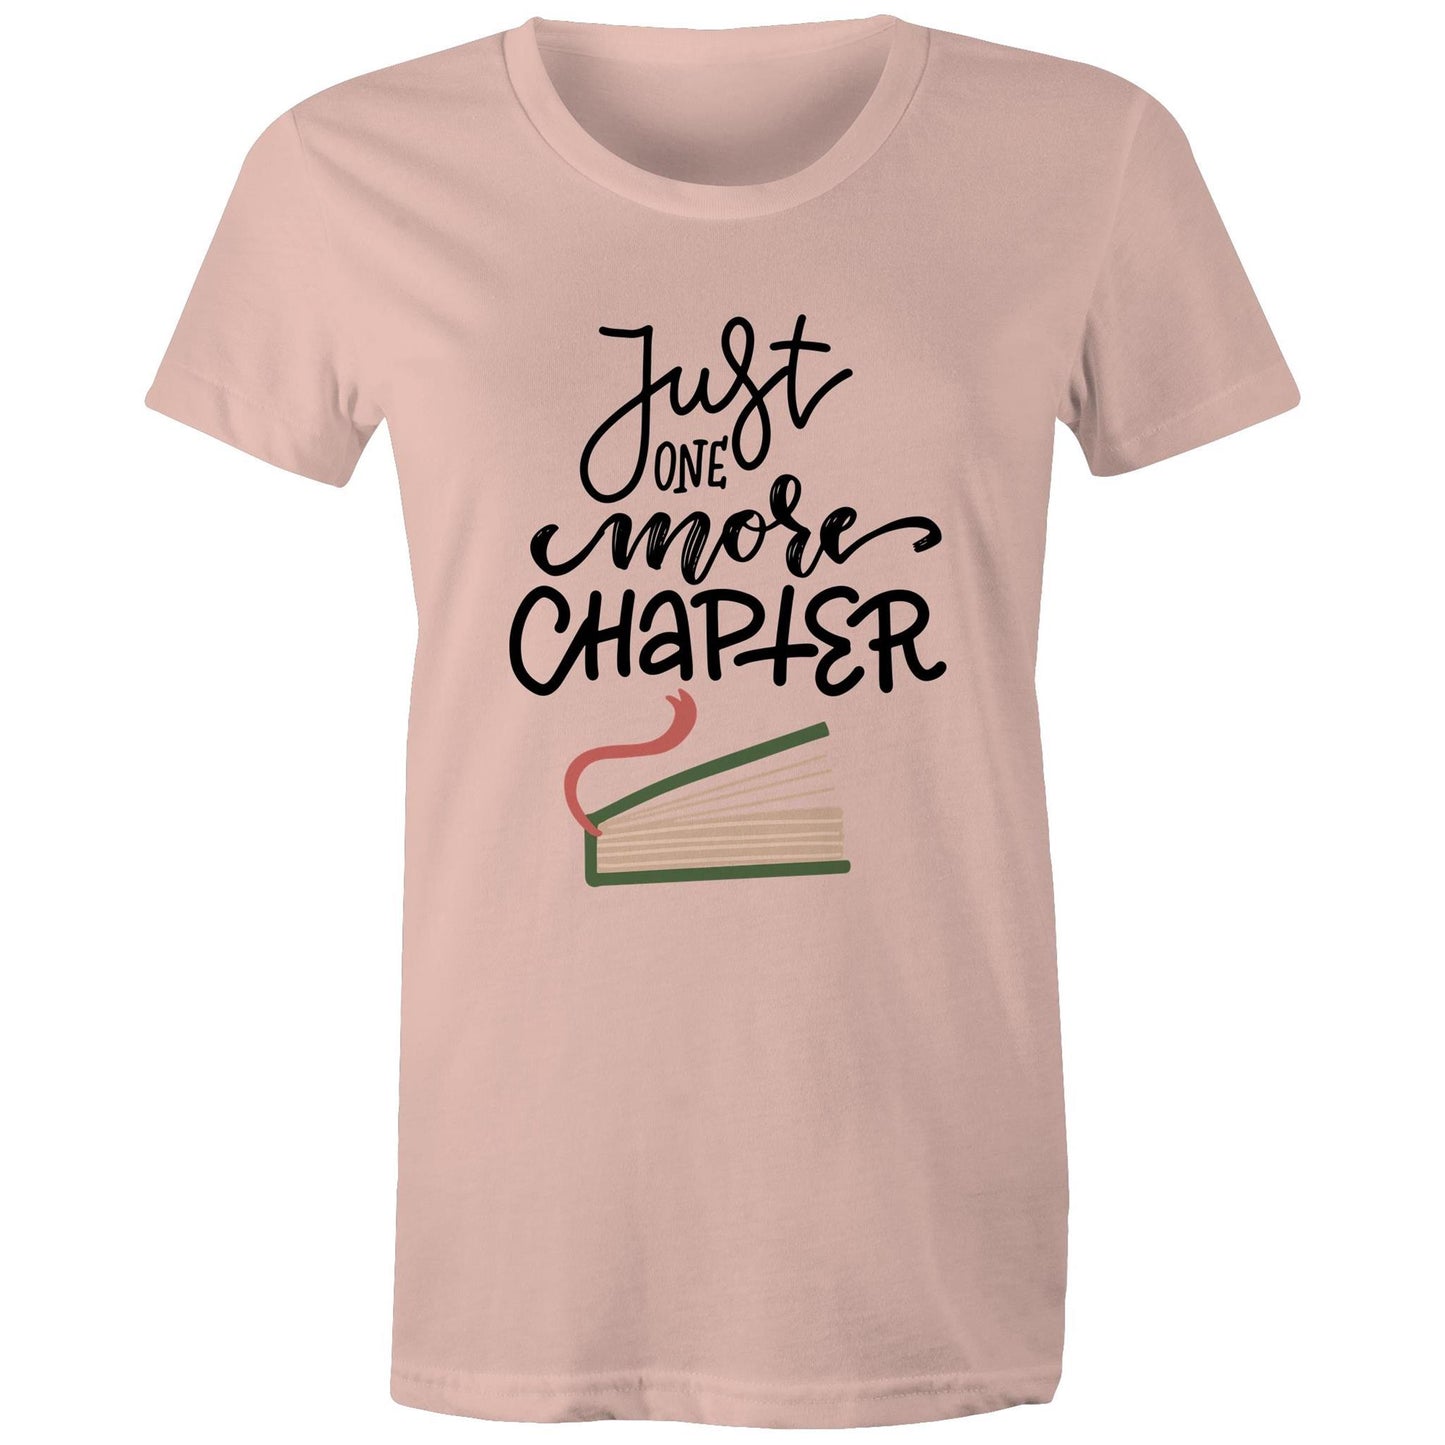 Just One More Chapter - Womens T-shirt Pale Pink Womens T-shirt Reading